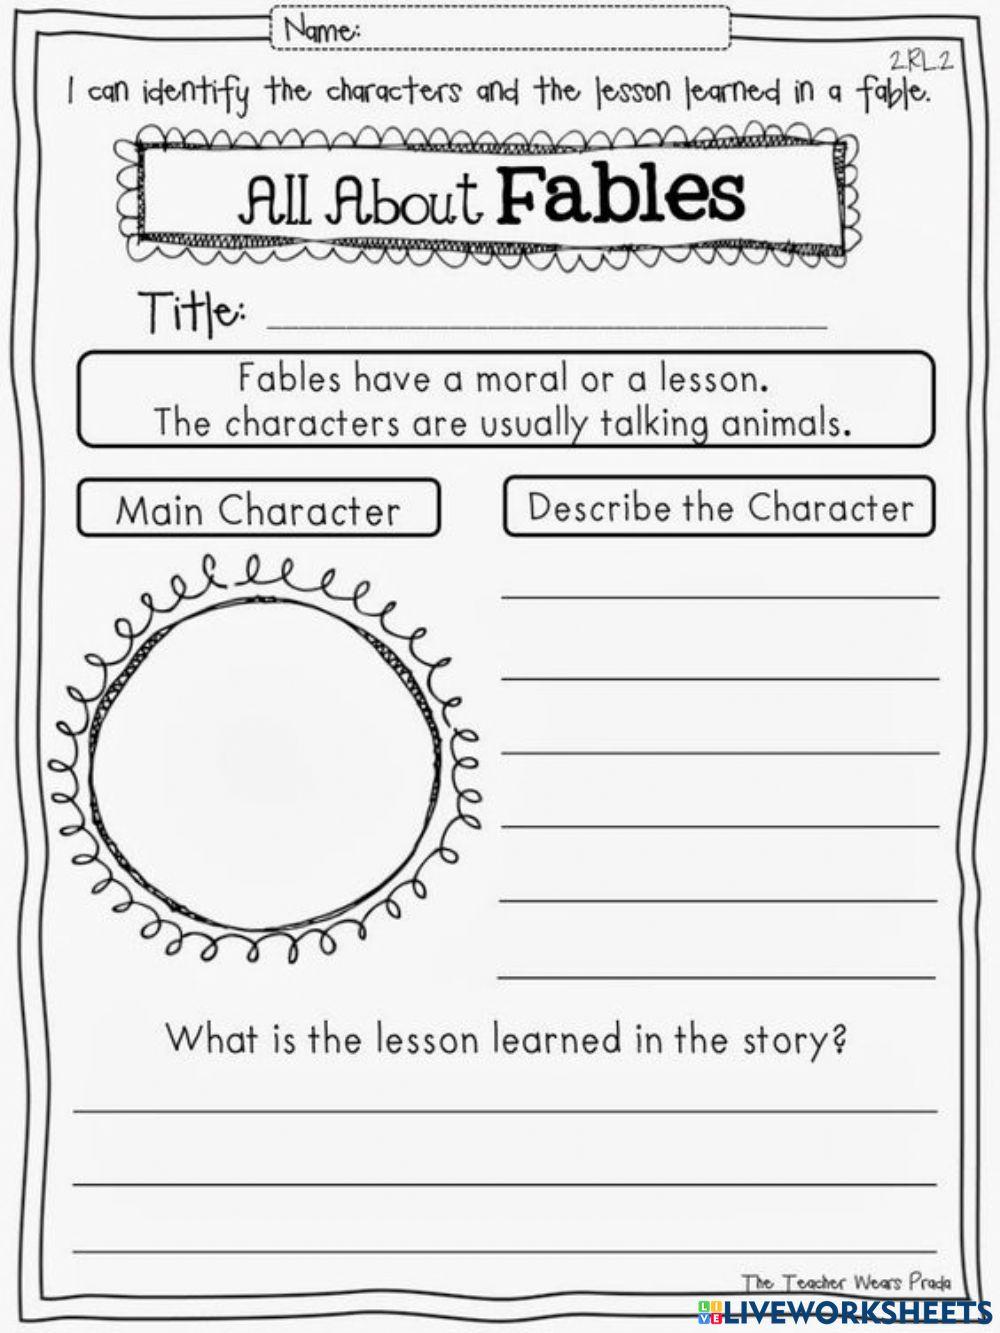 All About Fables